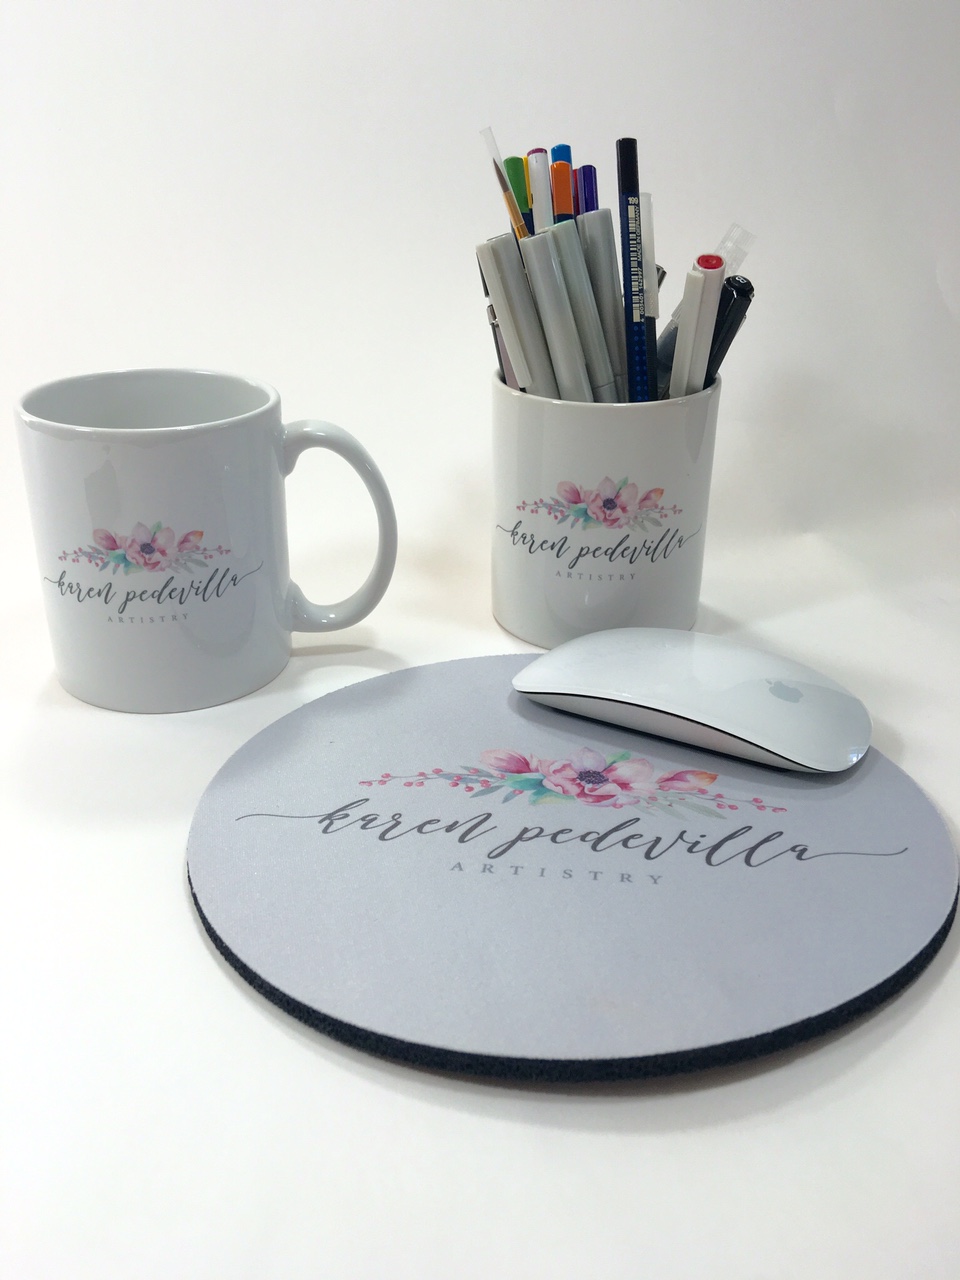 Pedevilla Artistry Logo made with sublimation printing